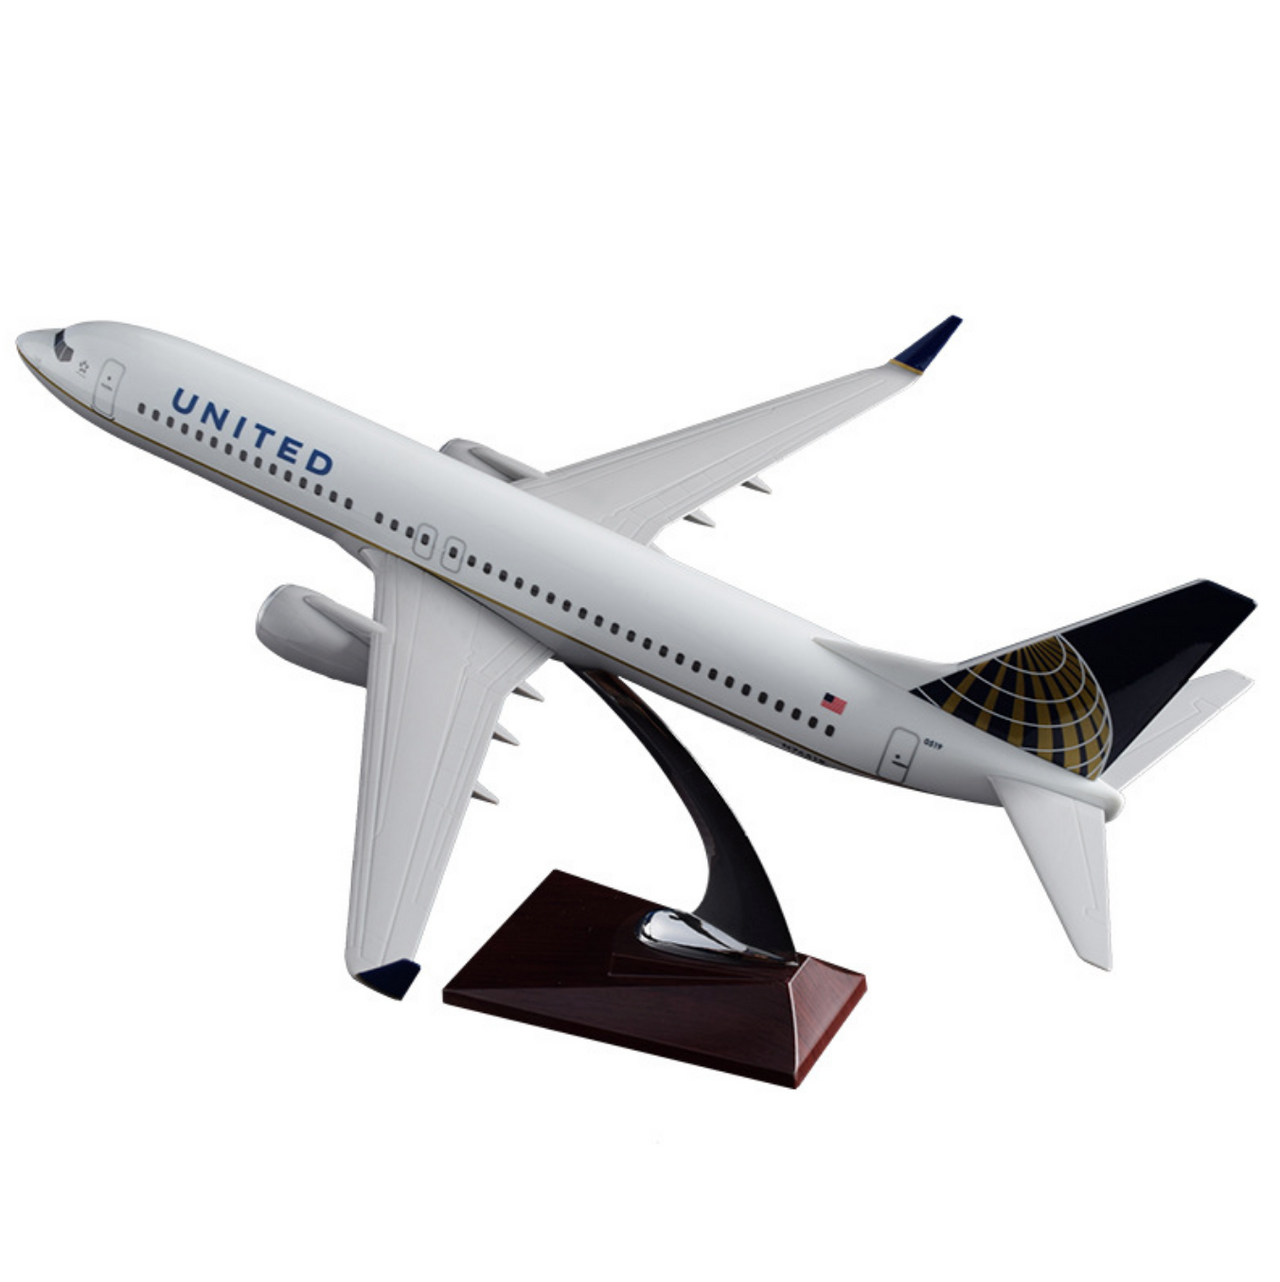 United Boeing 737-800 Airplane Model (Special Model 40CM)